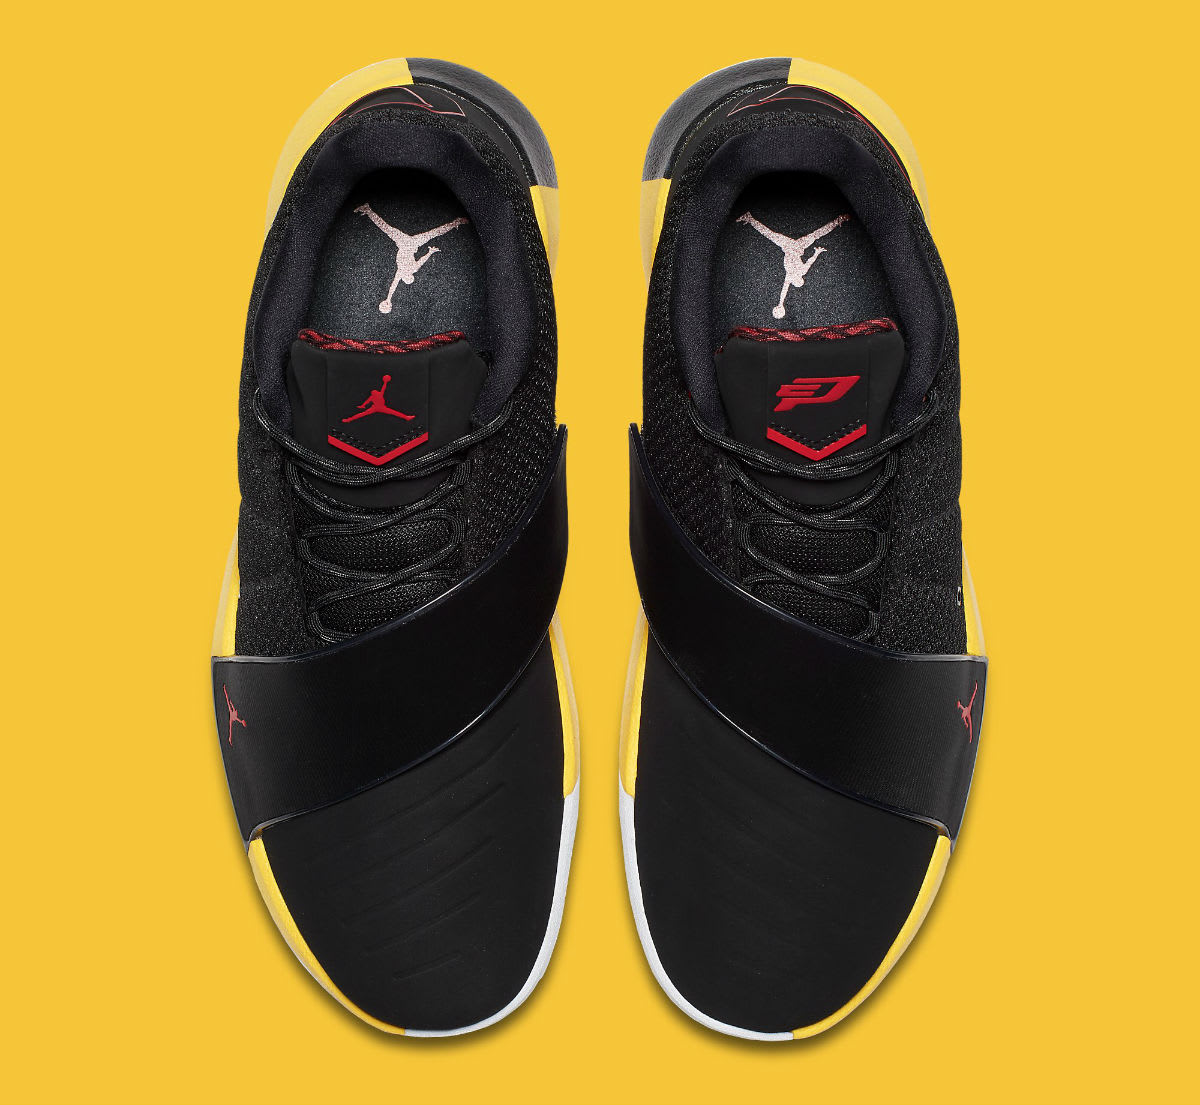 'Taxi' Jordan CP3.11 Surfaces Ahead of Playoffs | Complex